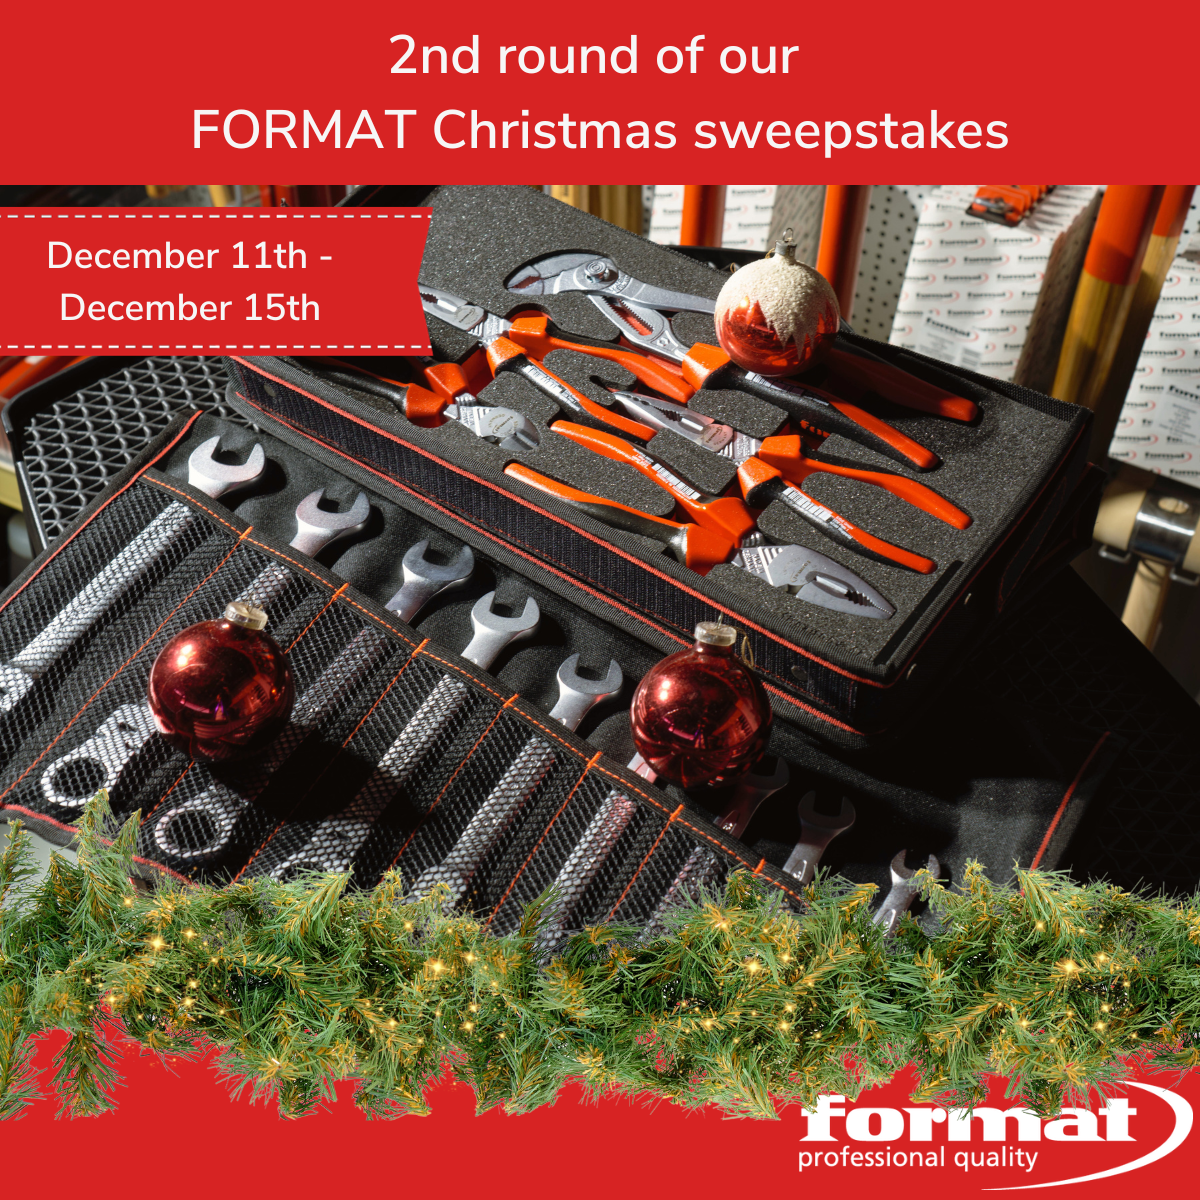 Our big FORMAT Christmas sweepstake enters its 2nd round!